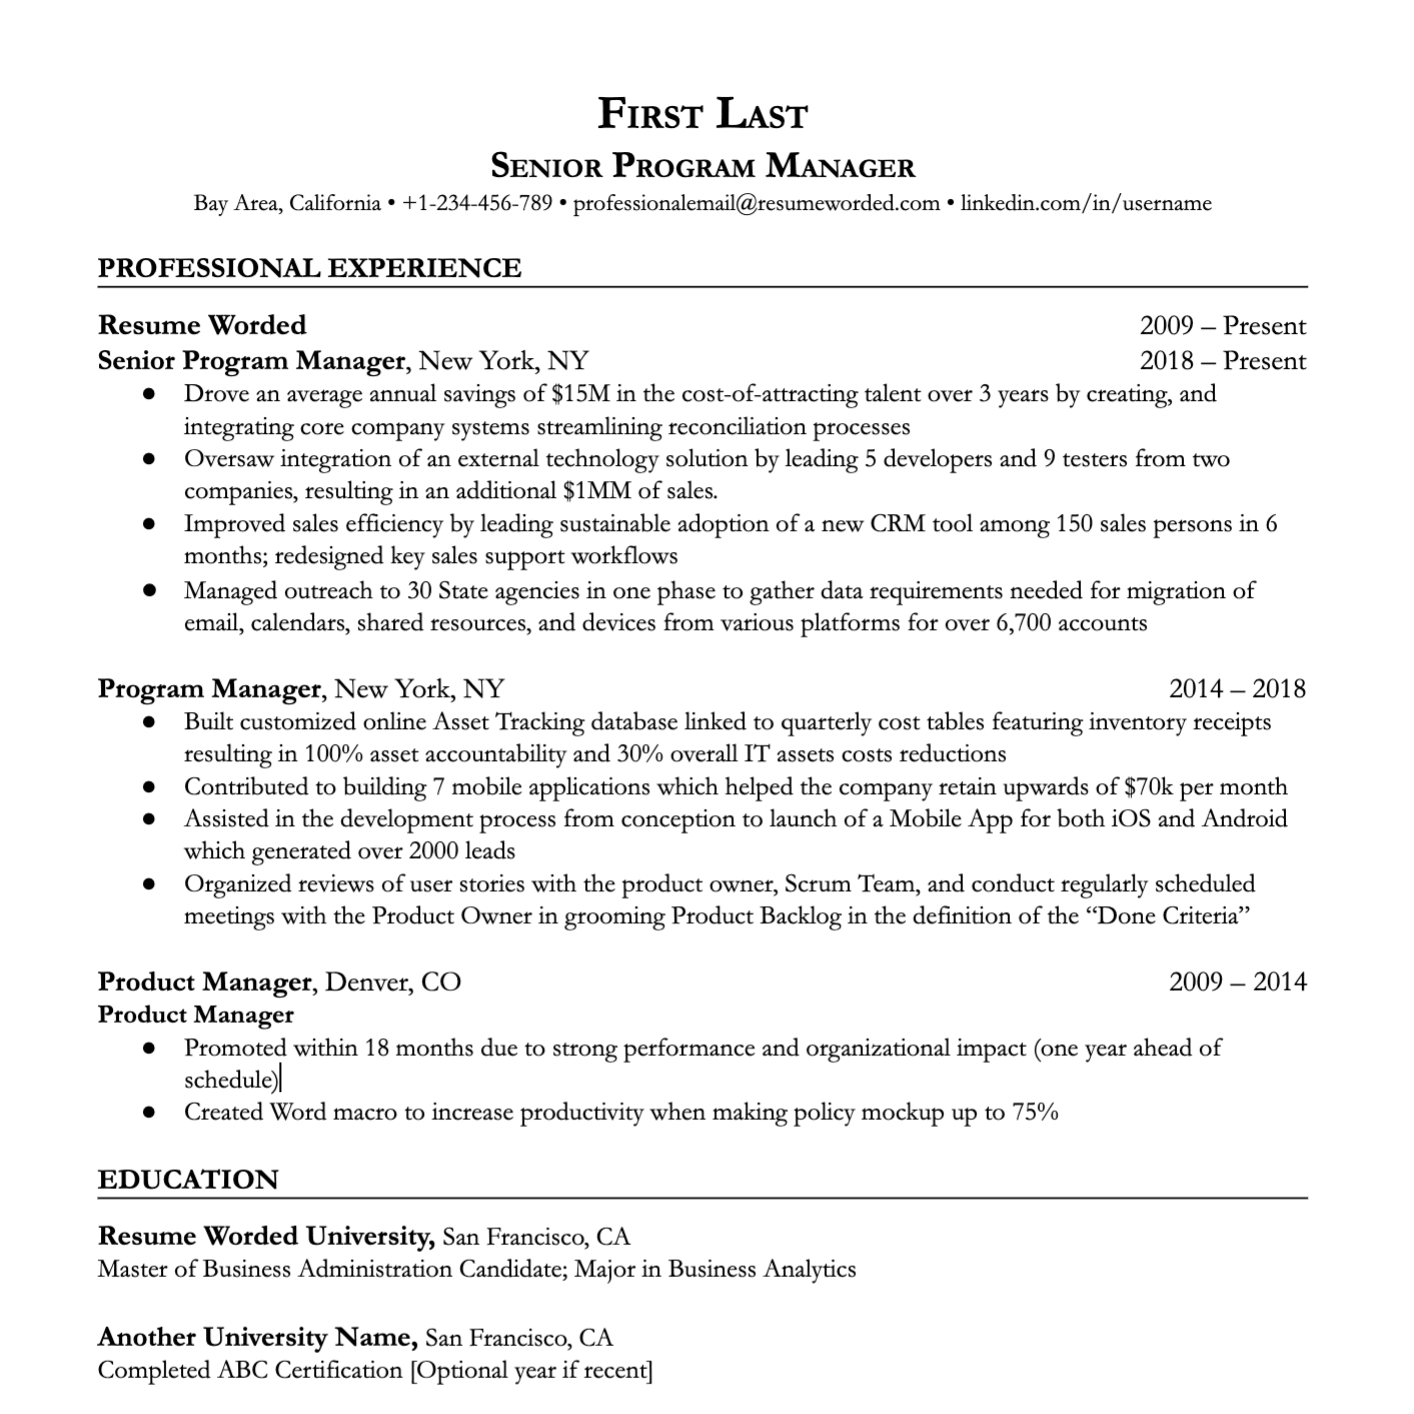 A resume example showing experience at one company throughout a career